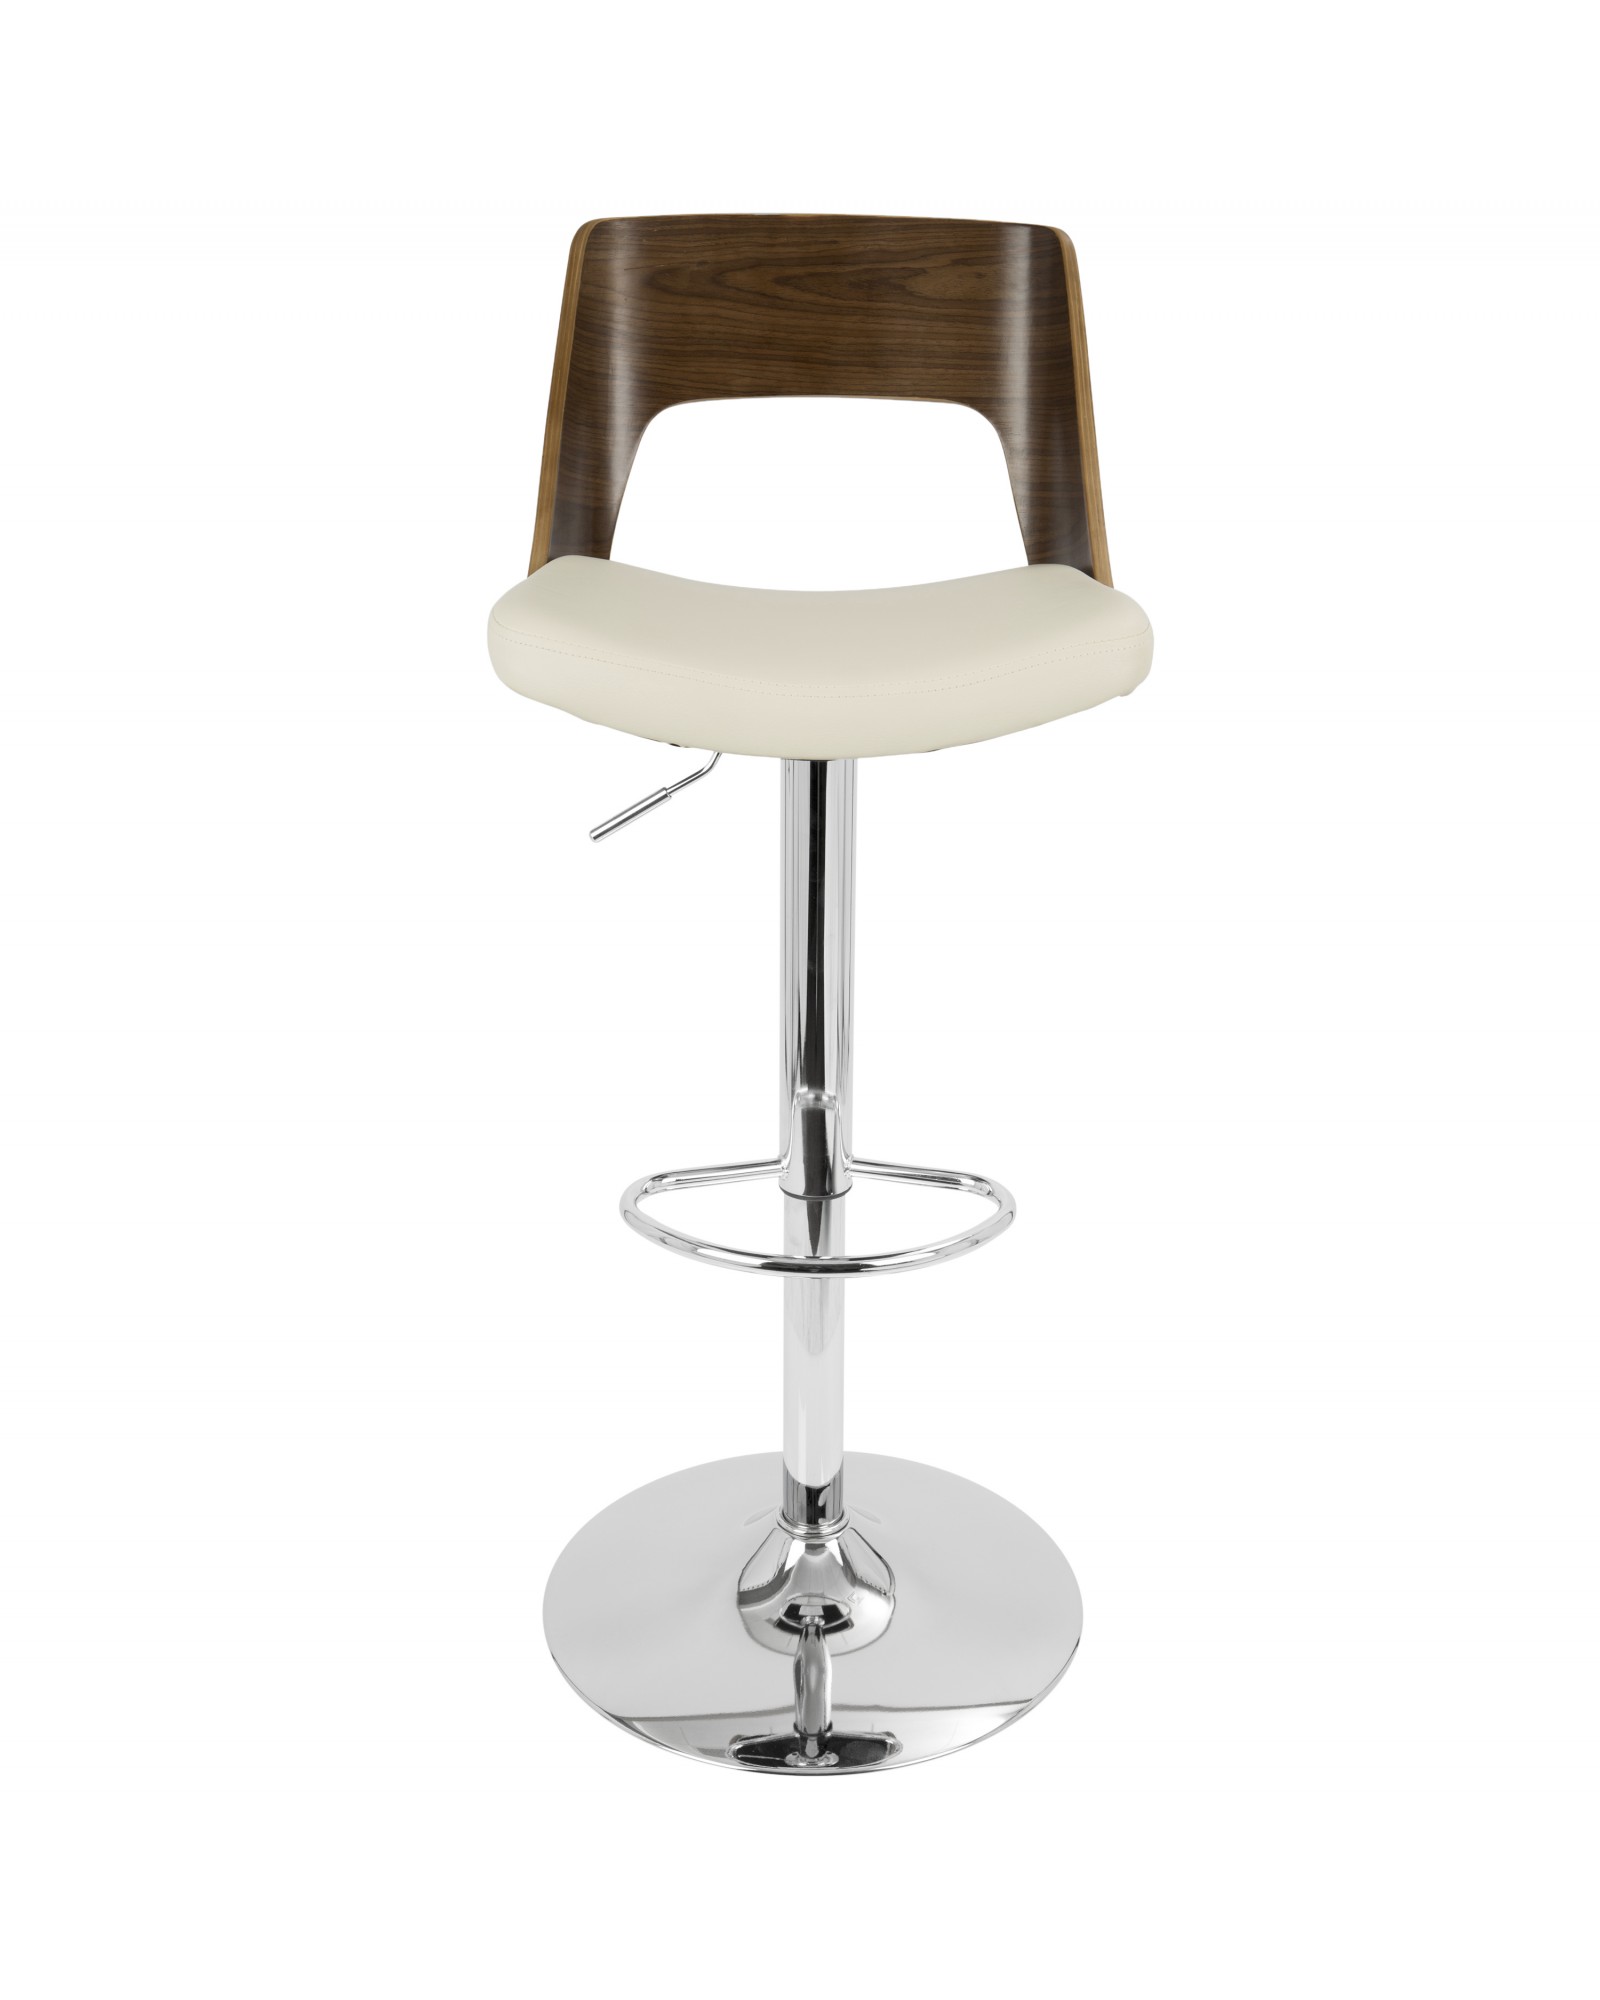 Valencia Mid-Century Modern Adjustable Barstool with Swivel in Walnut and Cream Faux Leather